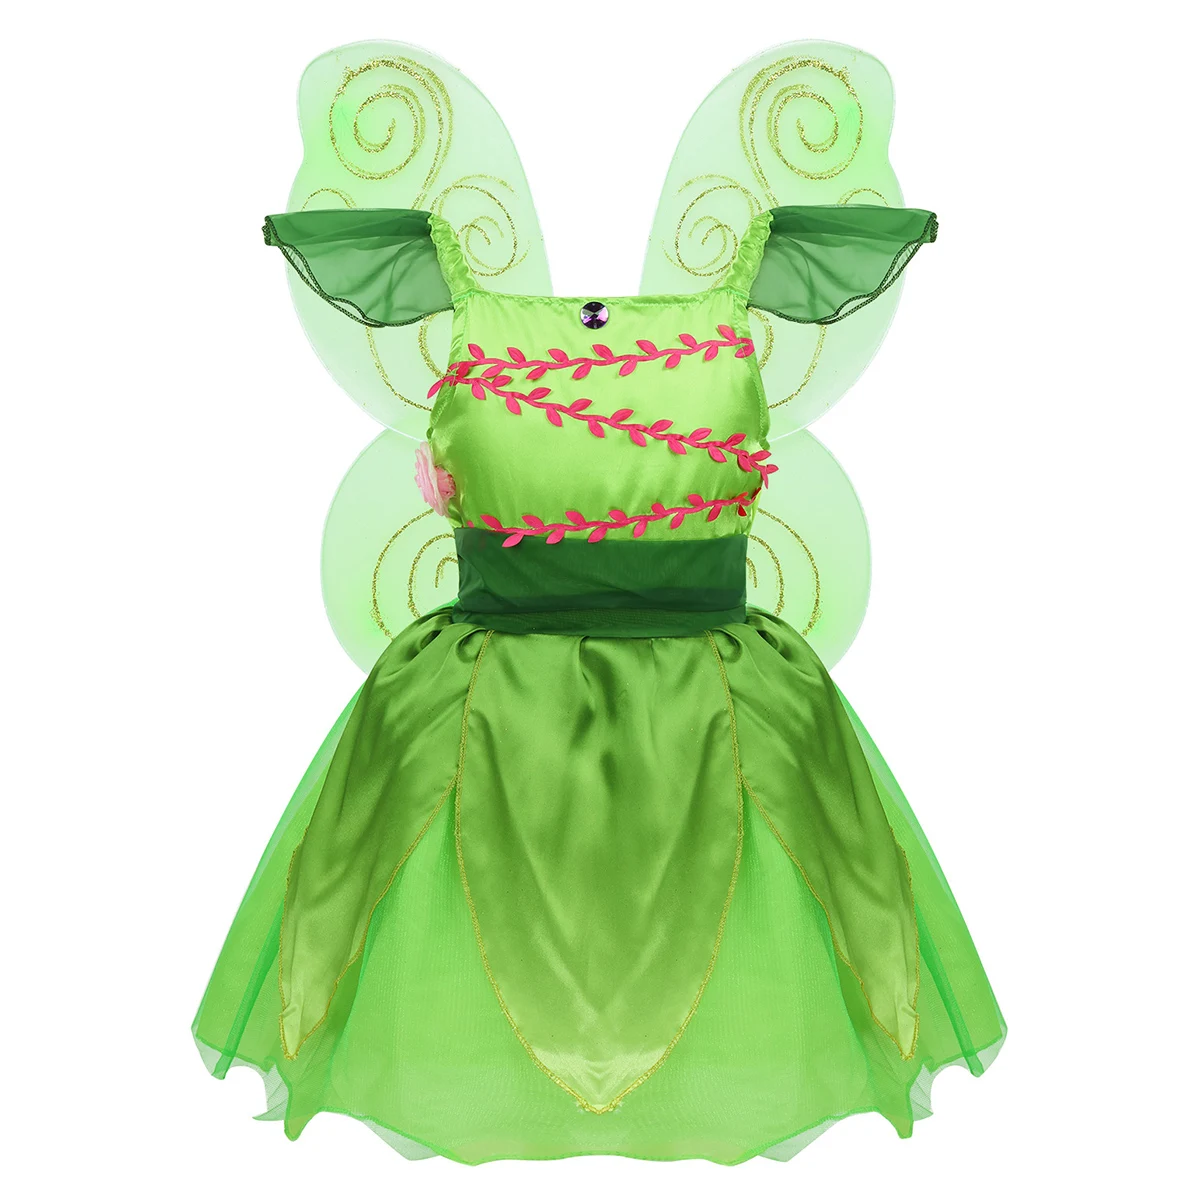 Girls Forest Fairy Costume Princess Dress Green Tutu Cosplay Tinkerbel Costumes Elves Halloween Fancy Outfit Christmas Party